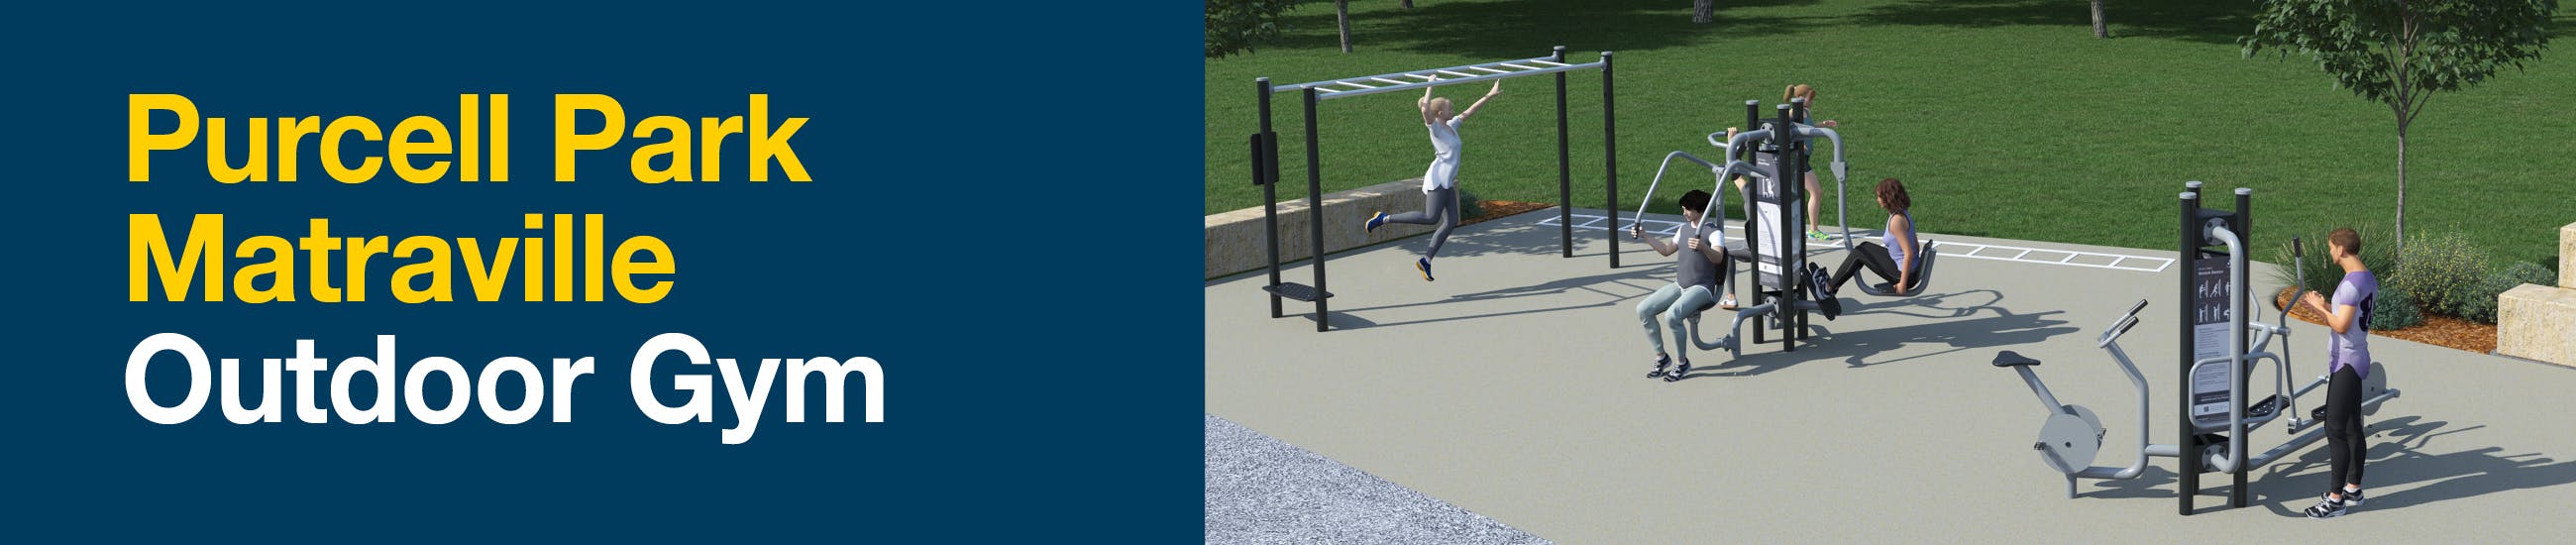 Purcell Park outdoor gym consultation